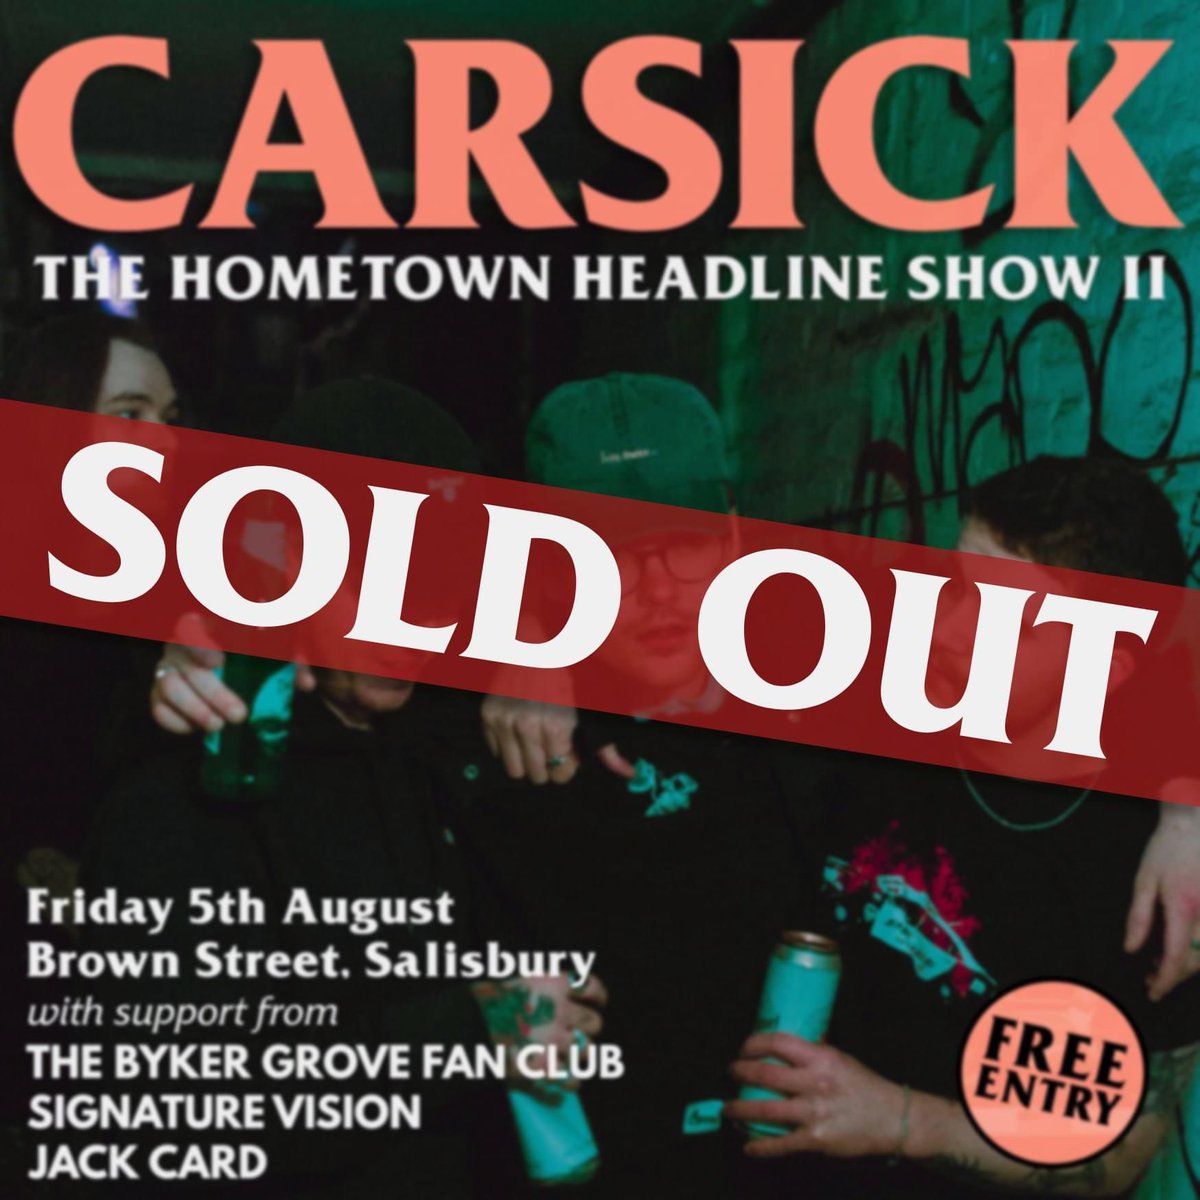 ICYMI: Salisbury has officially SOLD OUT 🔥 thanks for the love, see you on the 5th. bring the fucking energy x